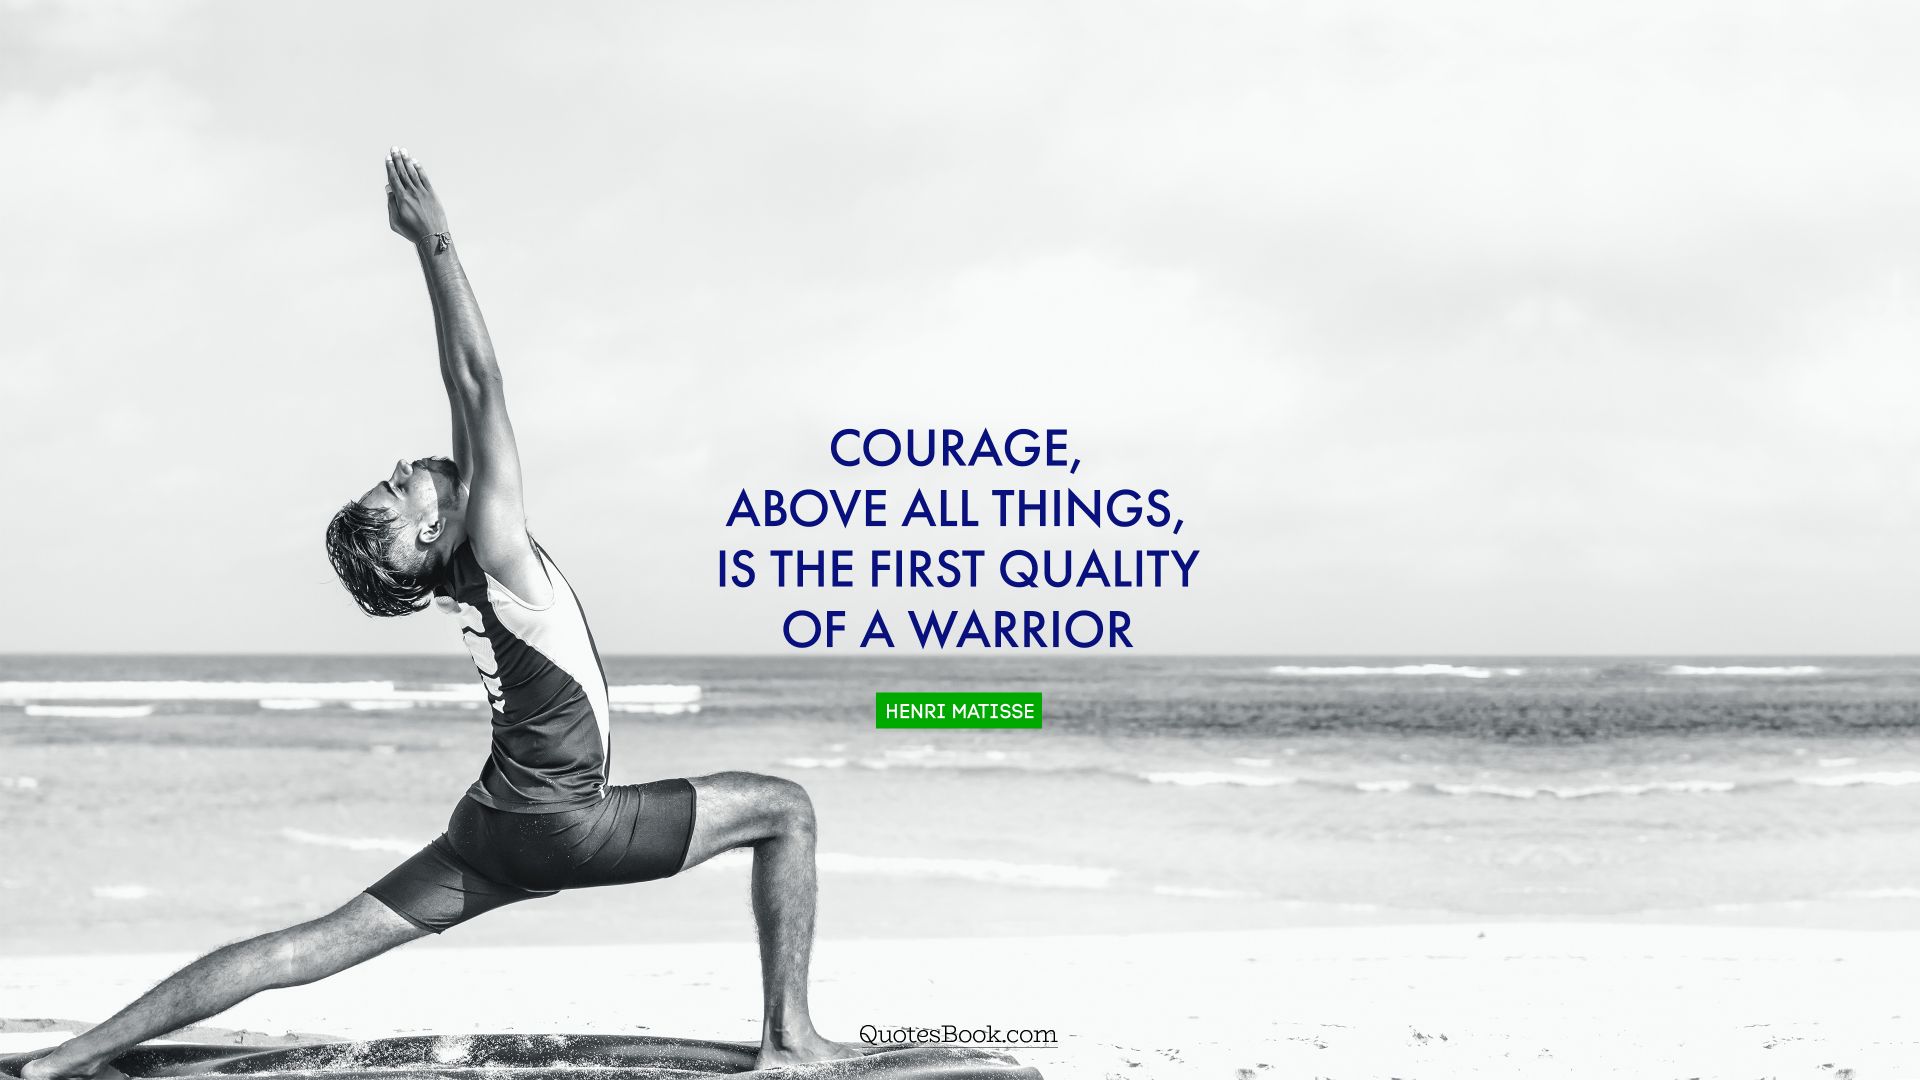 Courage, above all things, is the first quality of a warrior. - Quote by Carl von Clausewitz